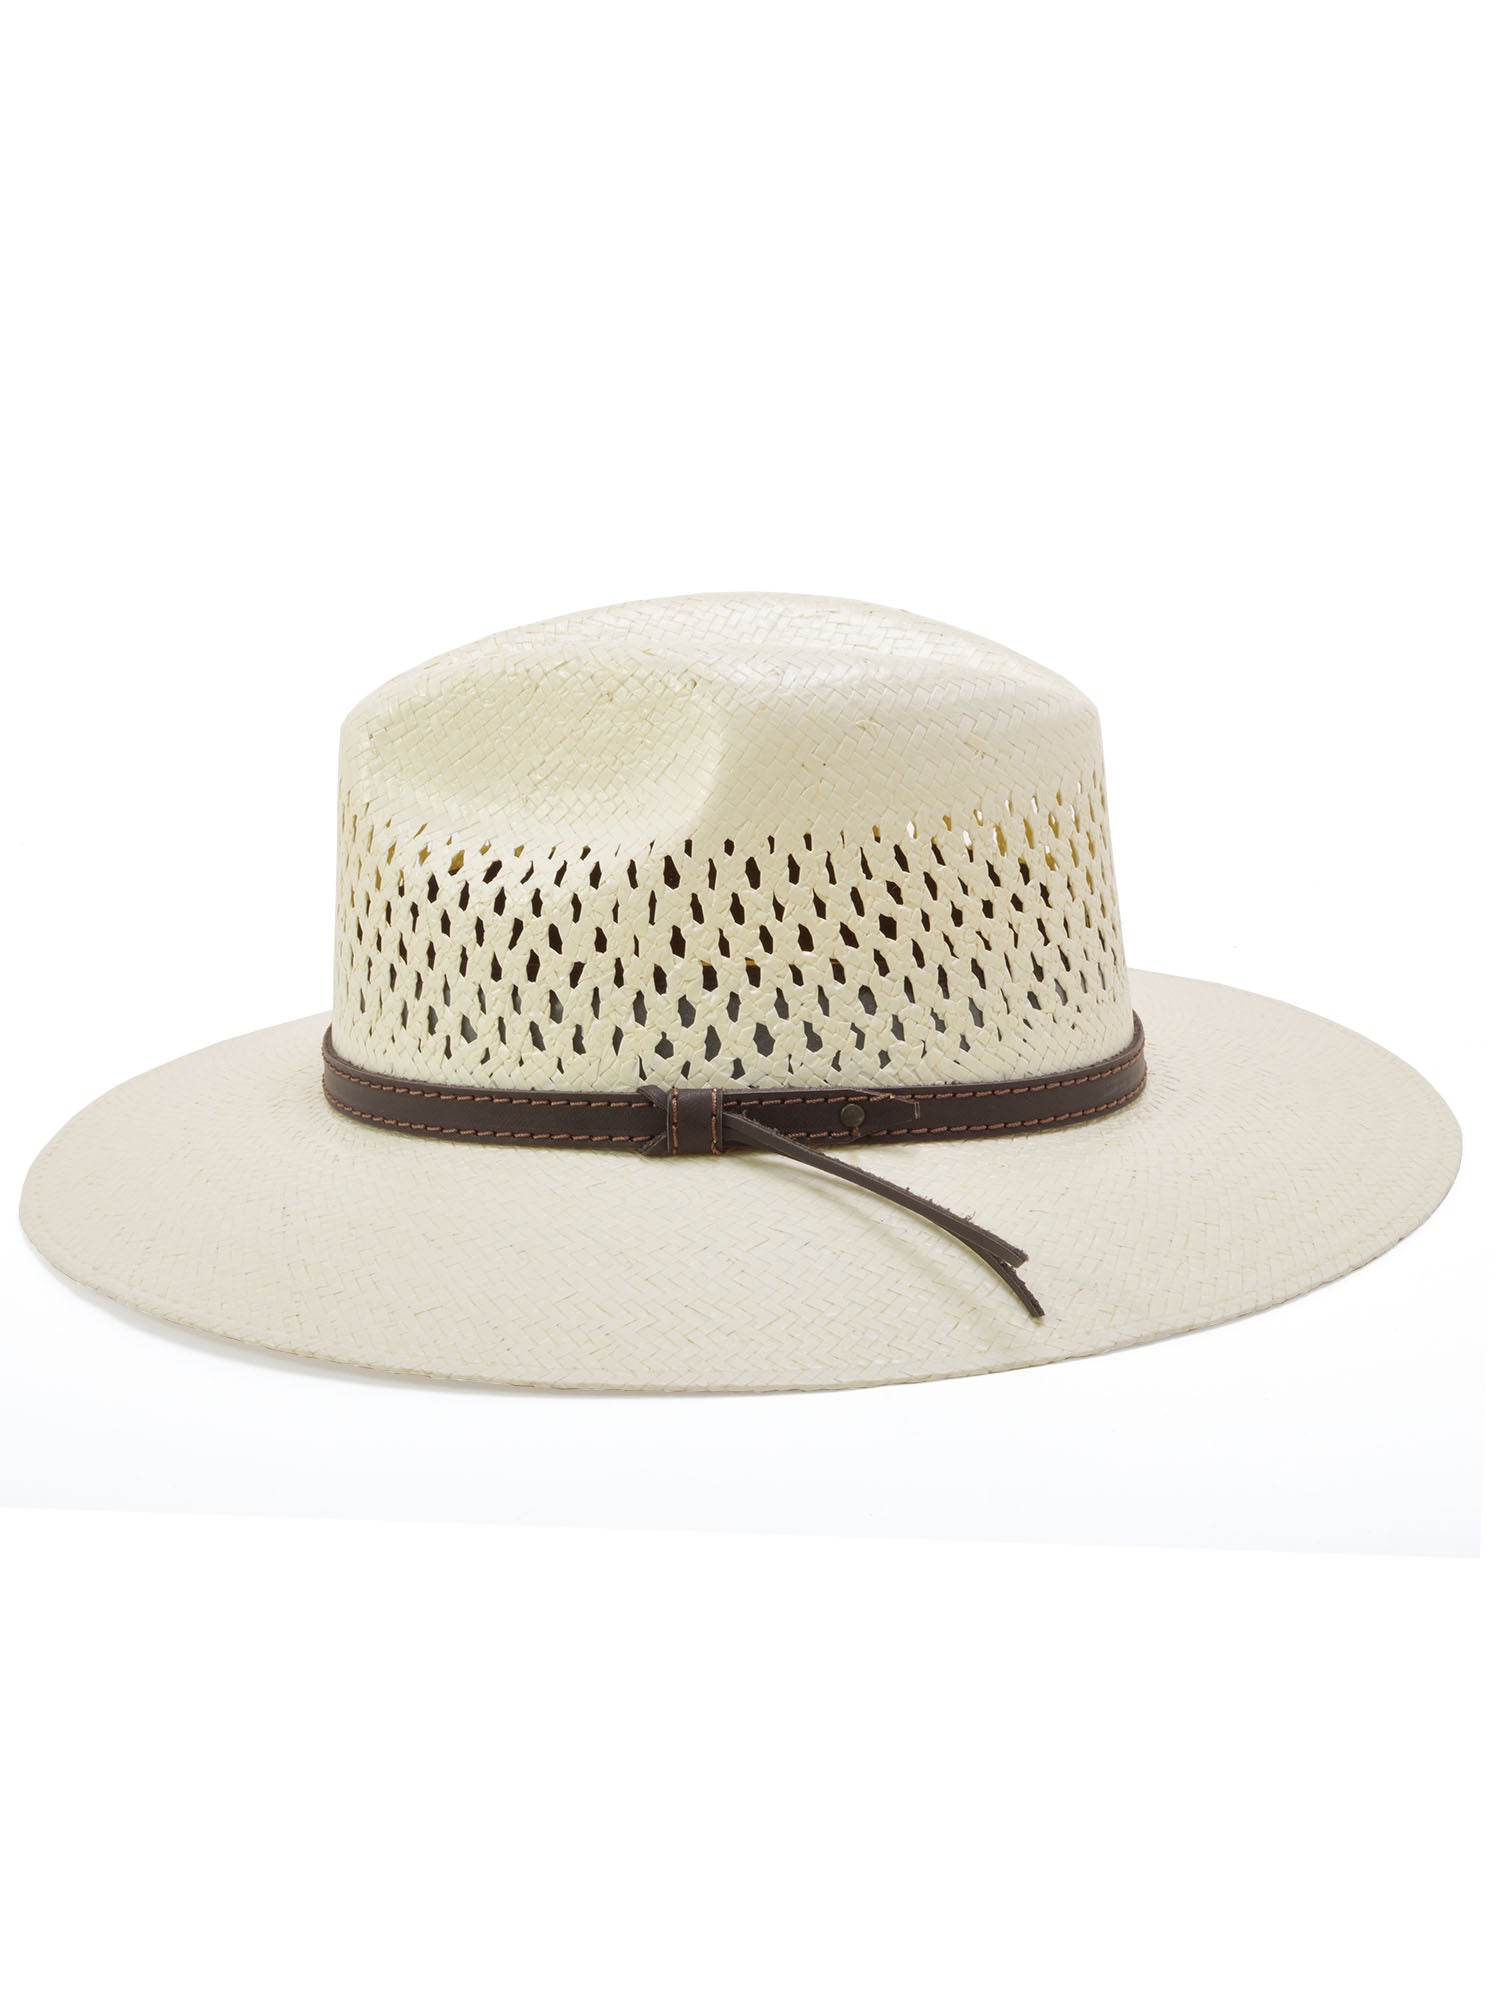 Stetson Digger Vented Shantung Straw Hat